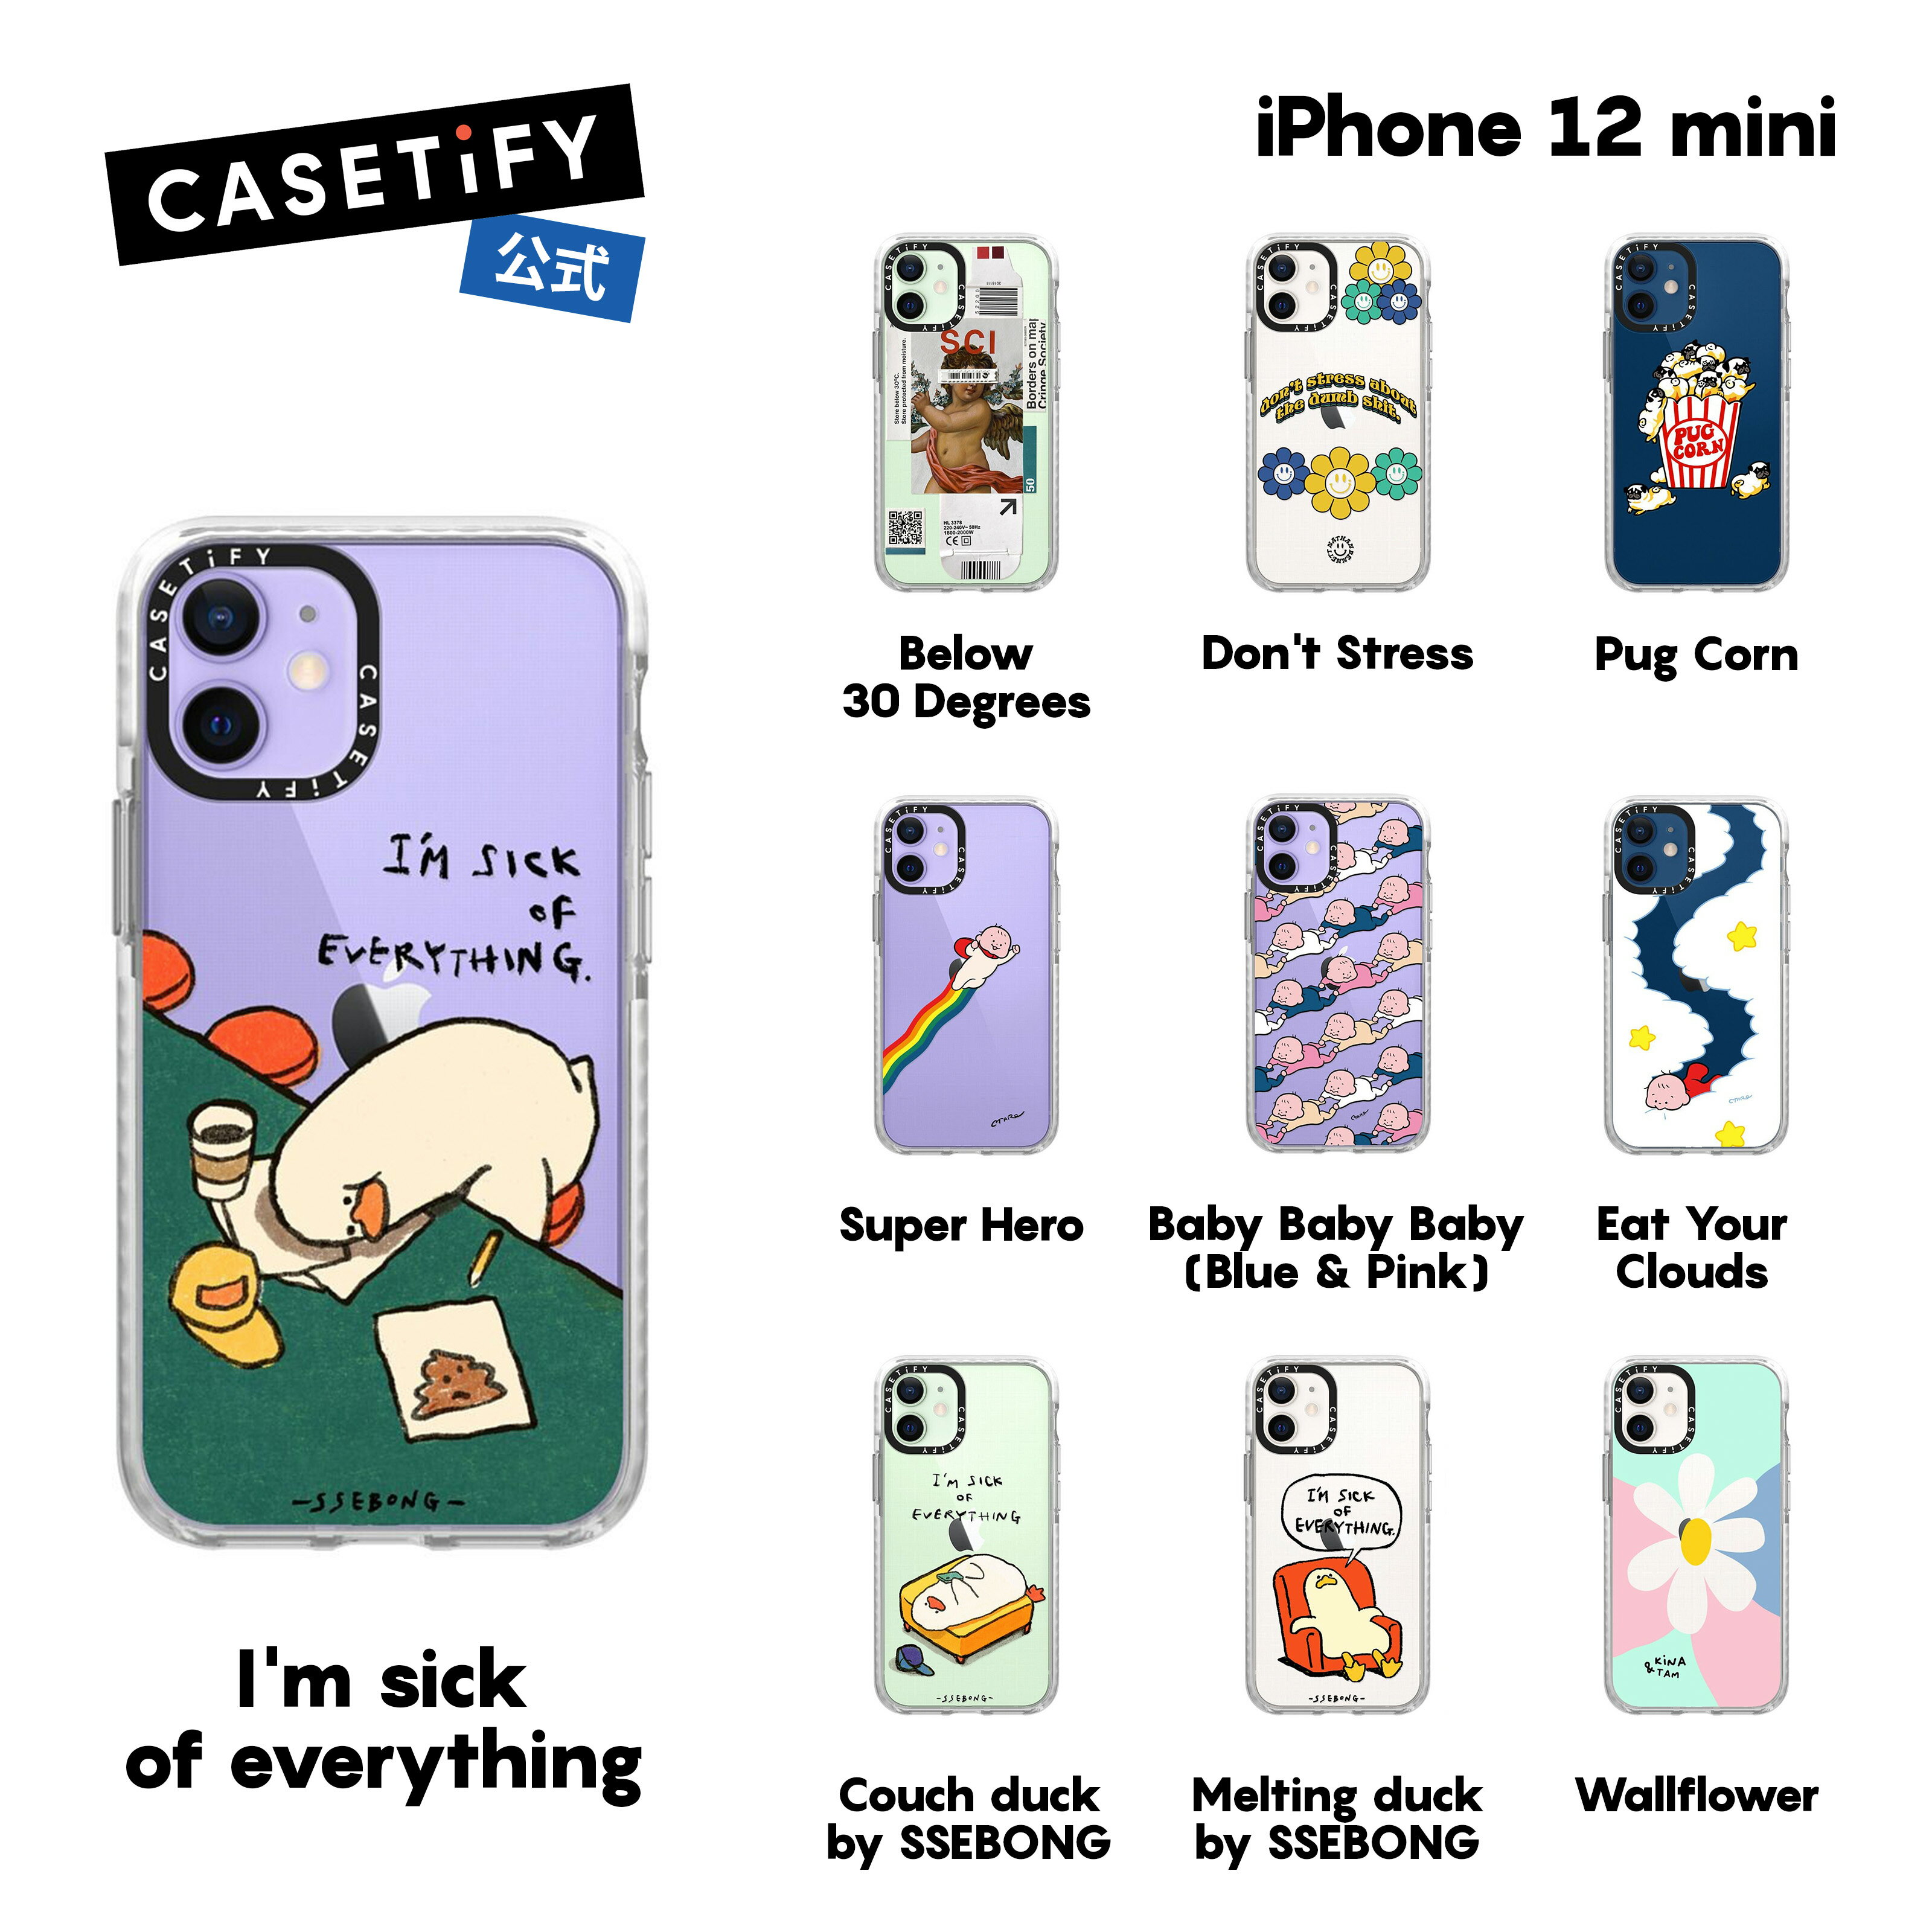 CASETiFY iPhone 12Mini インパクトケース クリア ブラック クリア フロスト Pug Corn Super Hero I'm sick of everything Bed Time Story DAISIES Below 30 Degrees iPhoneケース iPhone 12Mini 耐衝撃 保護ケース 透明